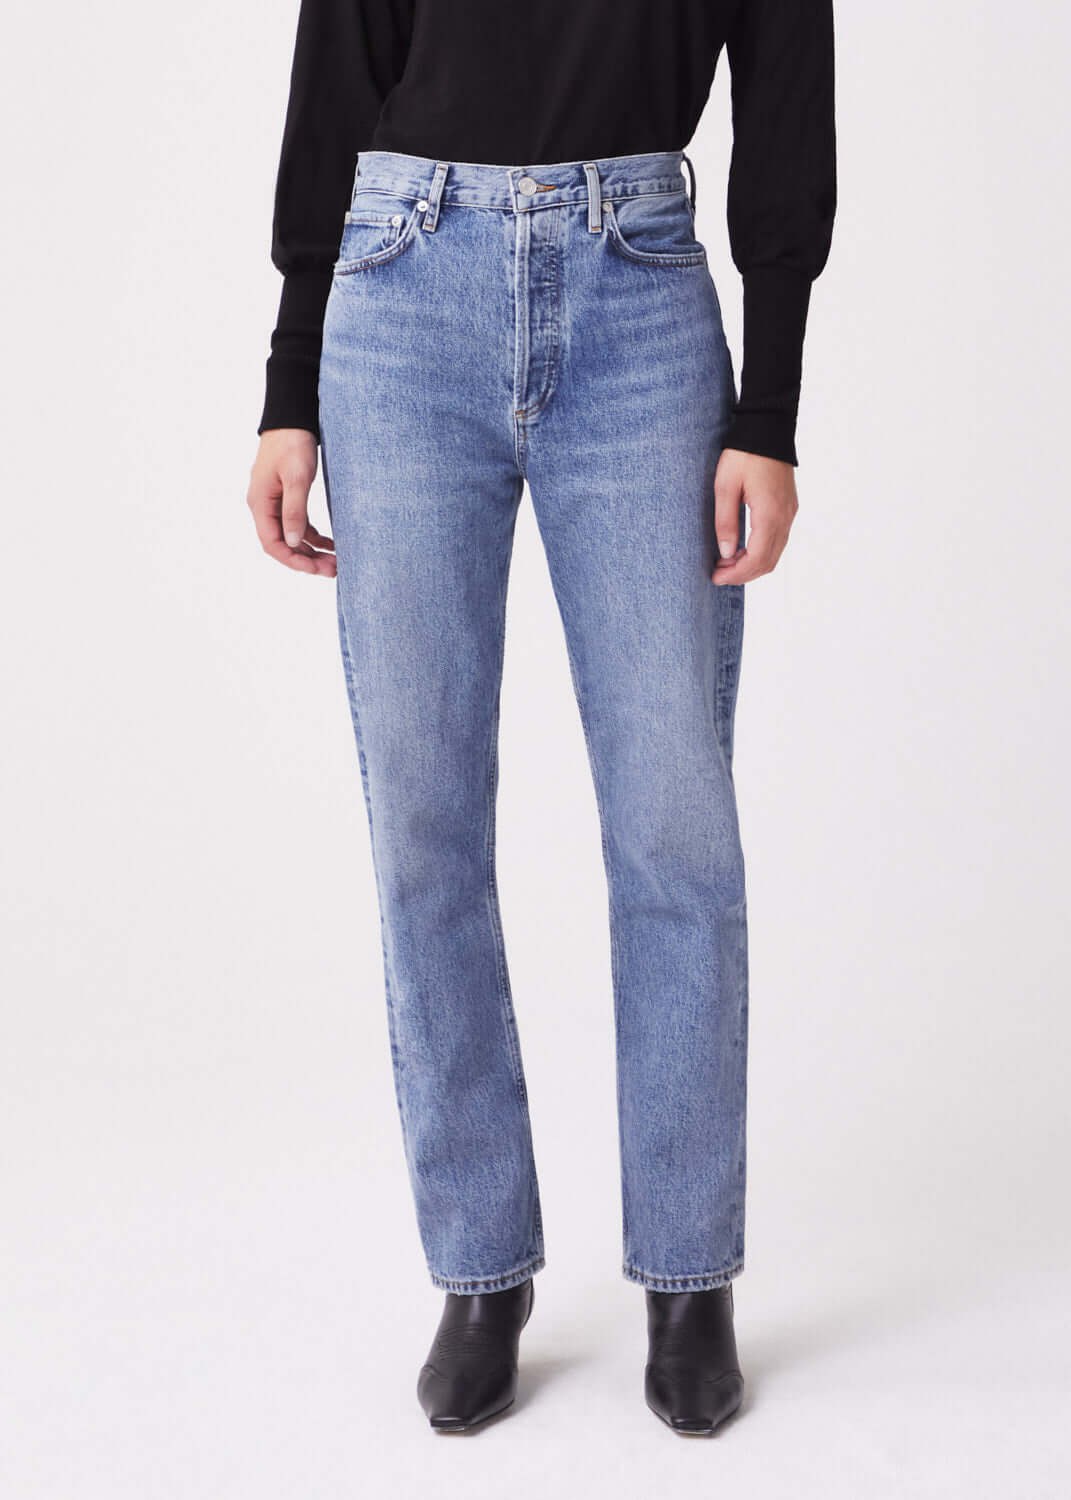 Agolde 90's Pinch Waist Jeans in Navigate from The New Trend